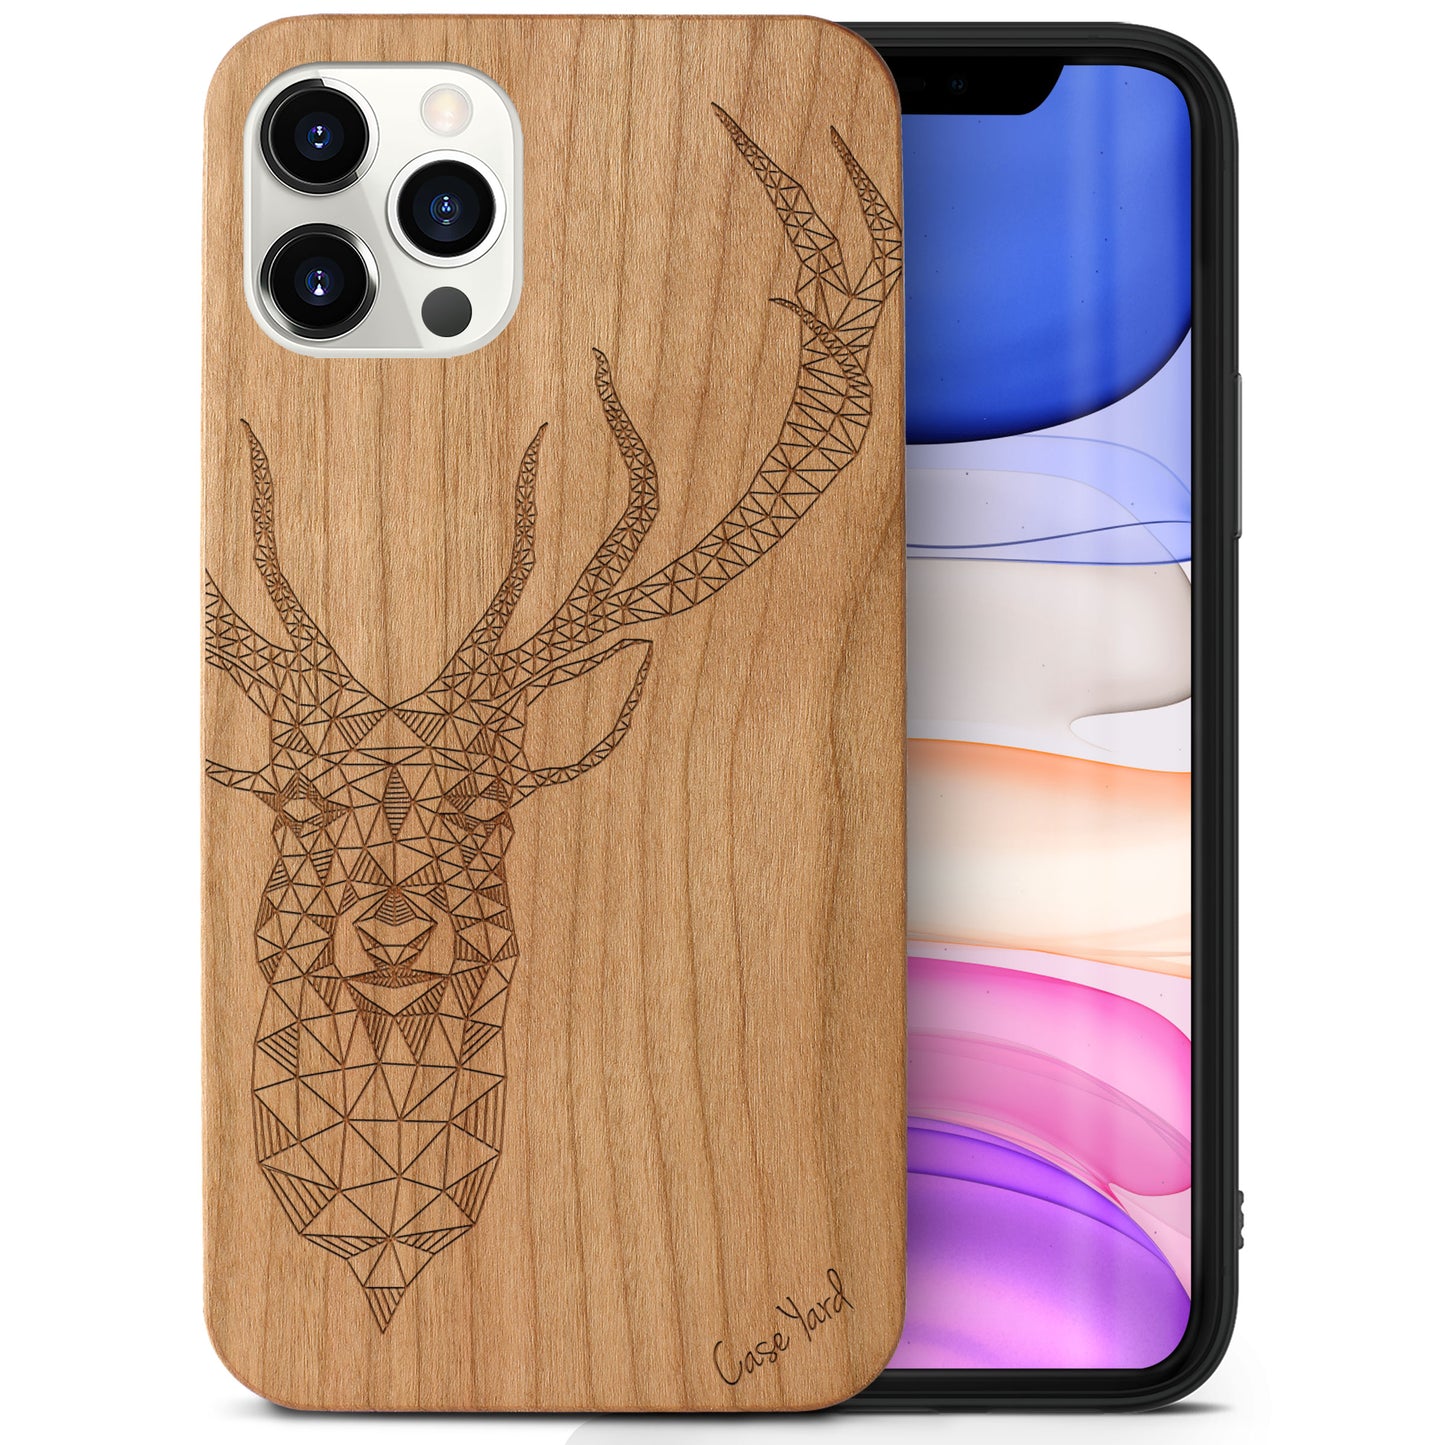 Wooden Cell Phone Case Cover, Laser Engraved case for iPhone & Samsung phone Deer Design